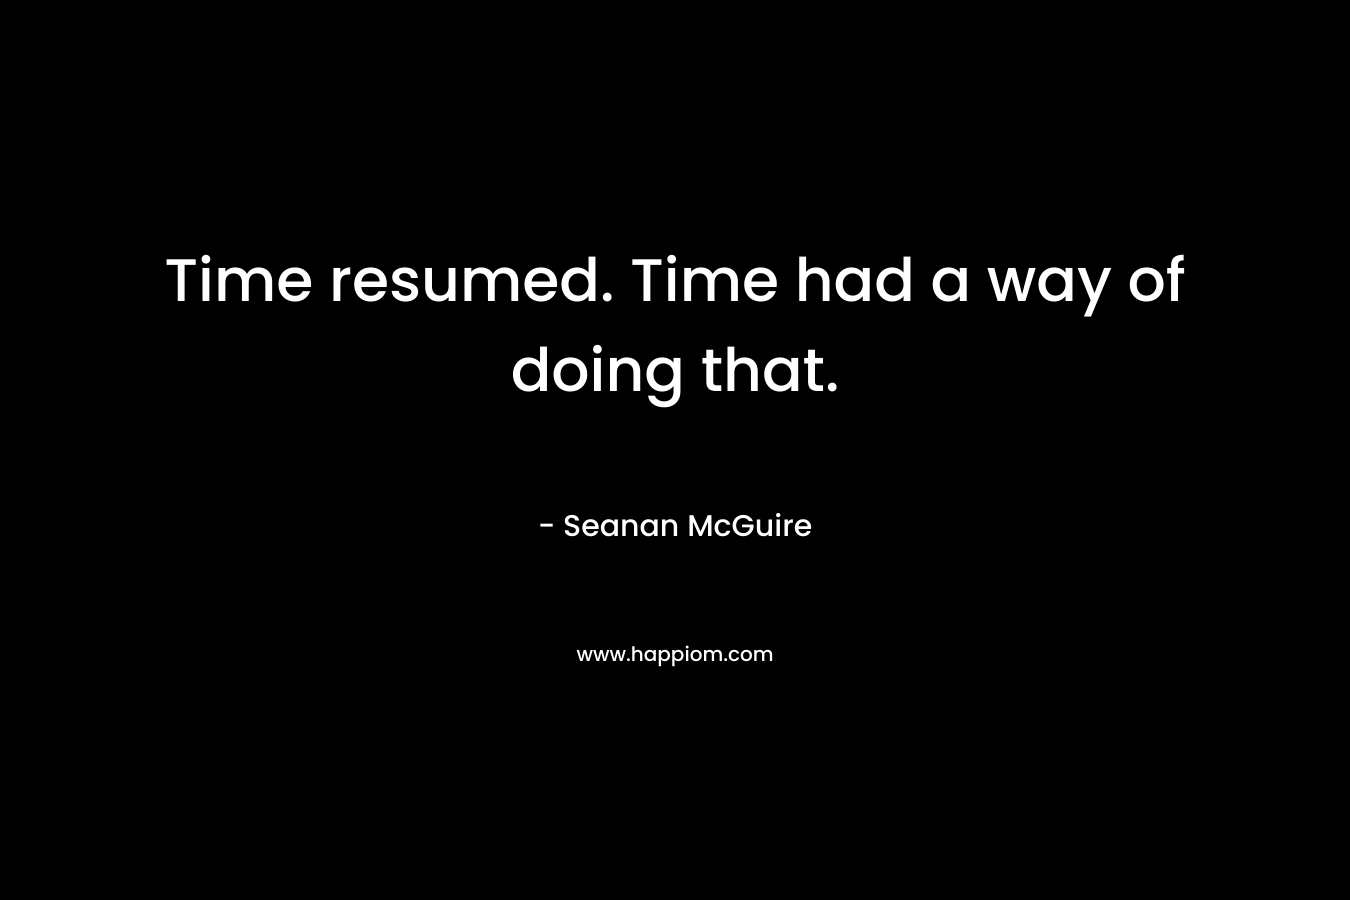 Time resumed. Time had a way of doing that. – Seanan McGuire